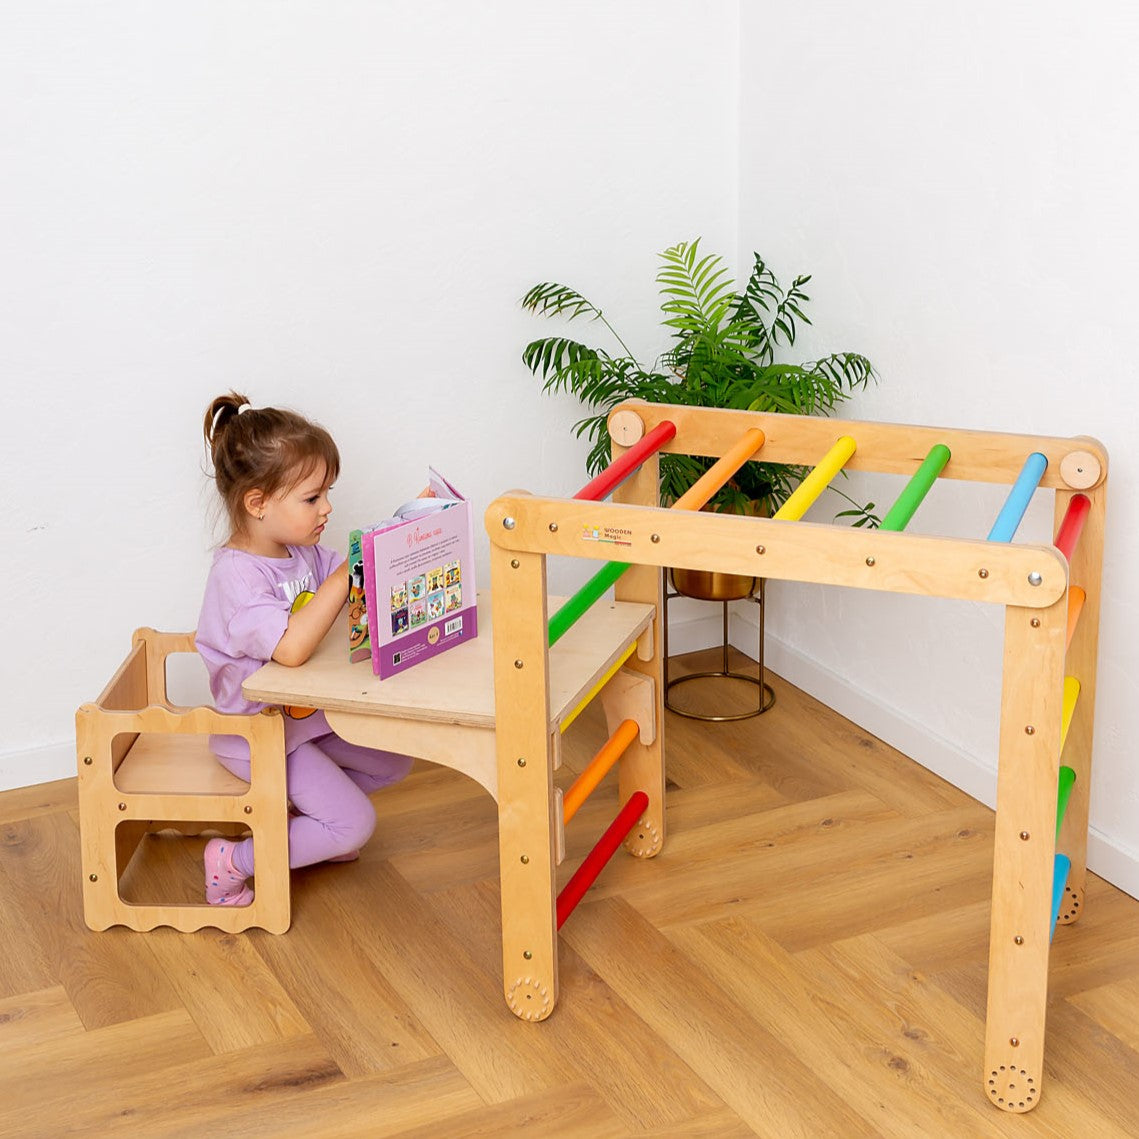 Wooden Table Attachment for Swedish Wall